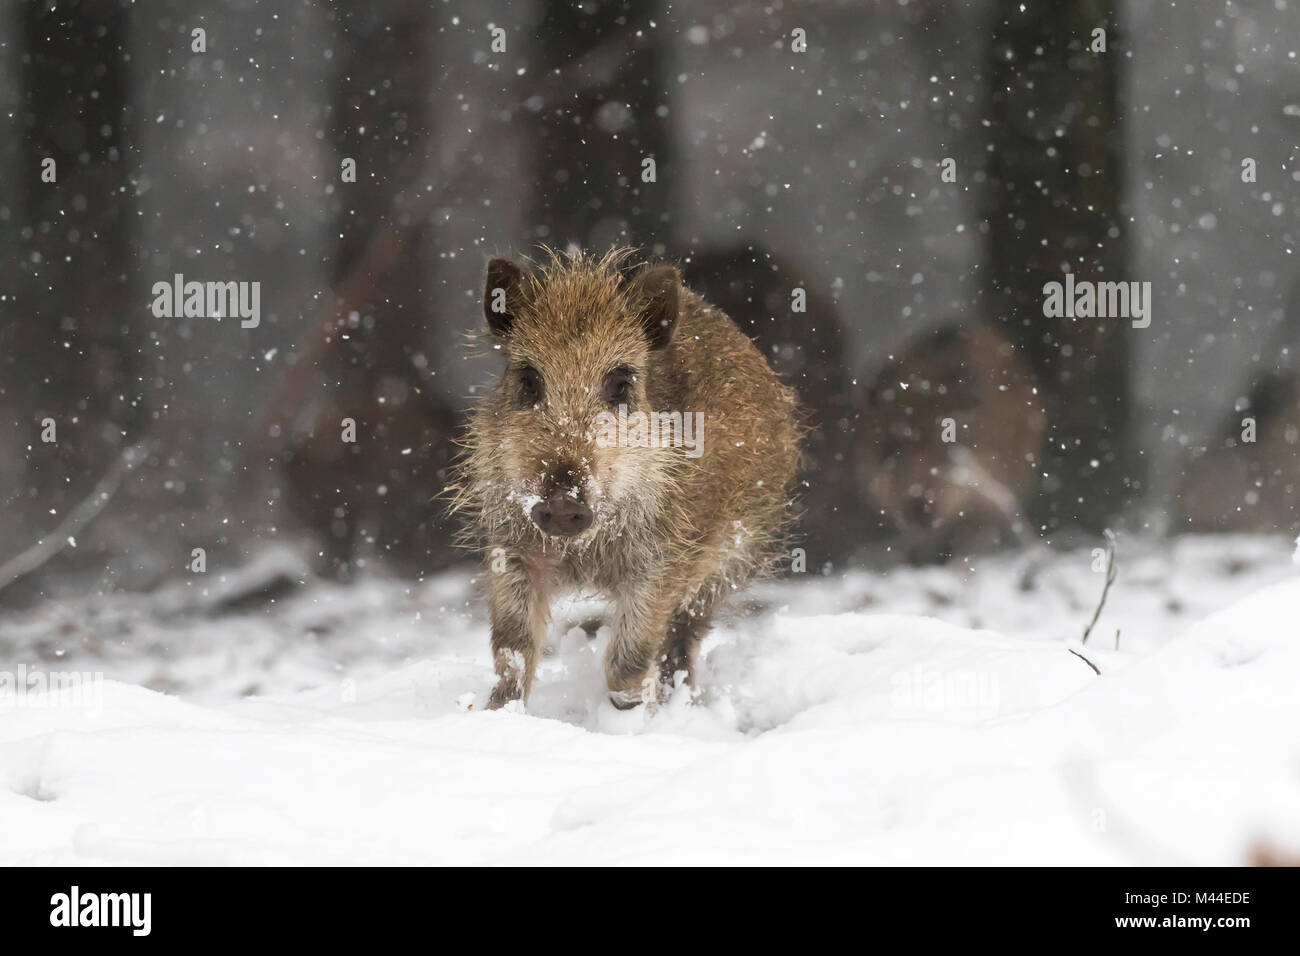 Wild boar (Sus scrofa). Young running in snow. Germany Stock Photo